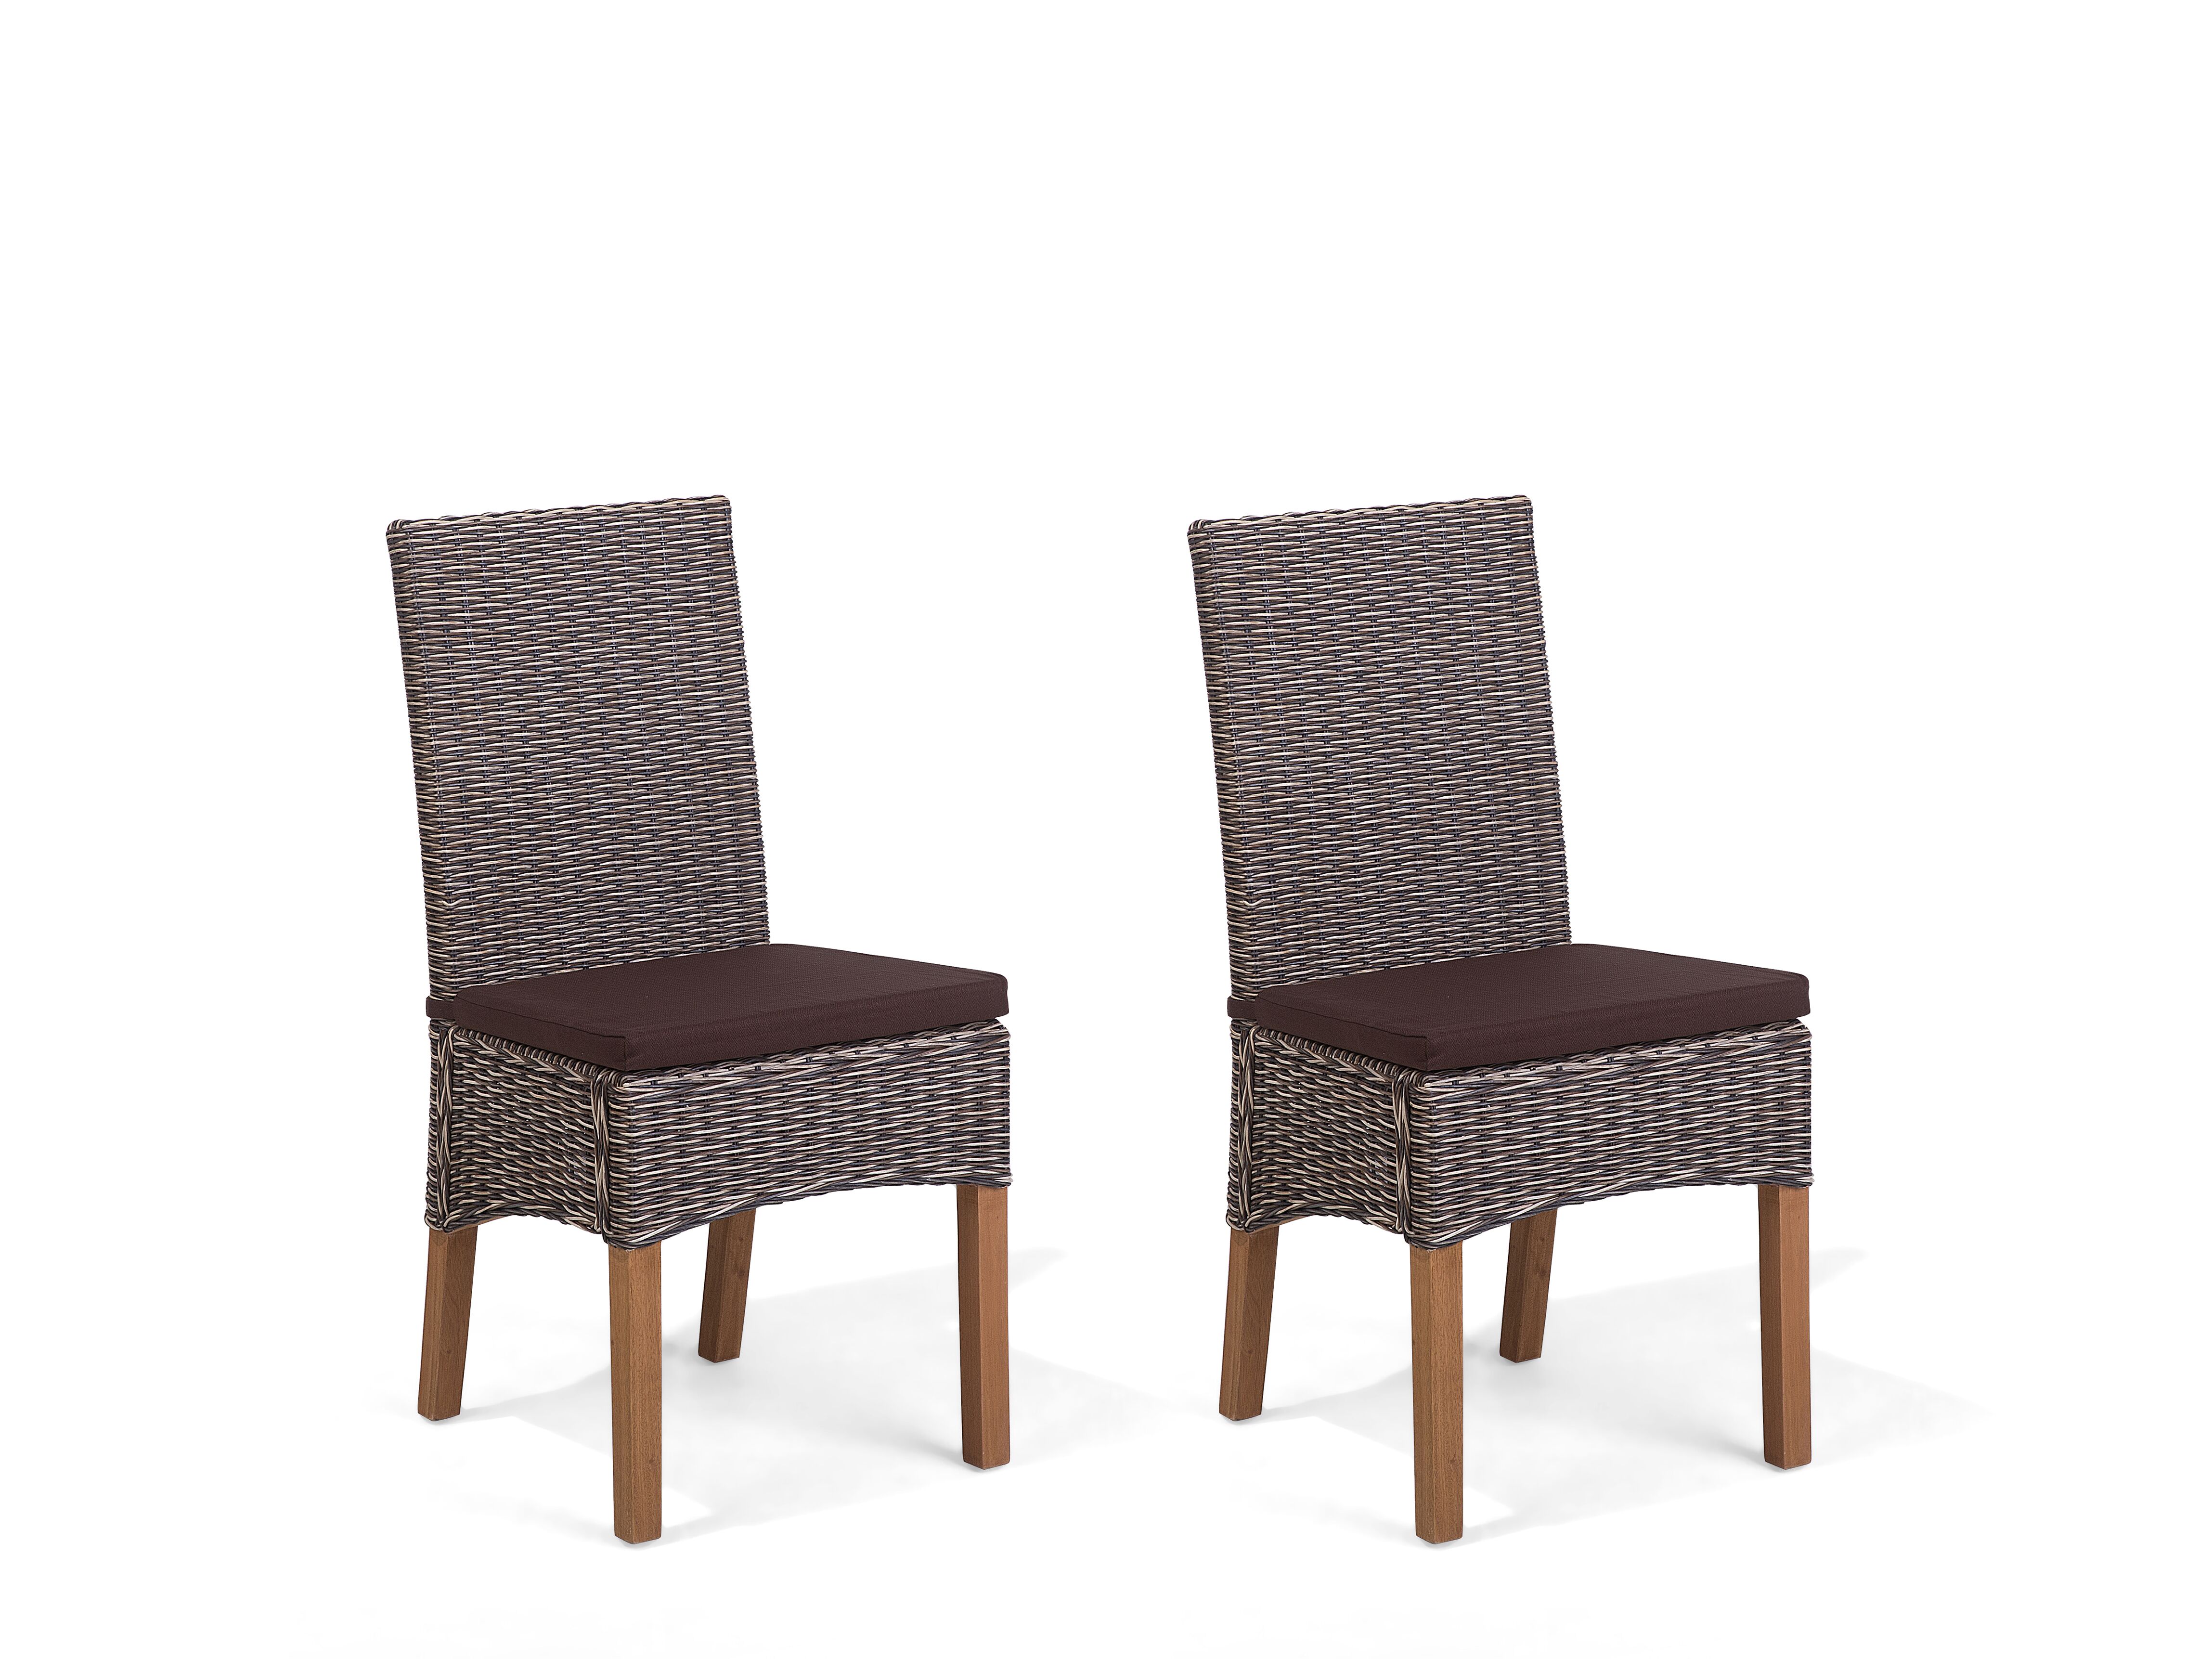 High Back Wicker Dining Chairs - Luanetg